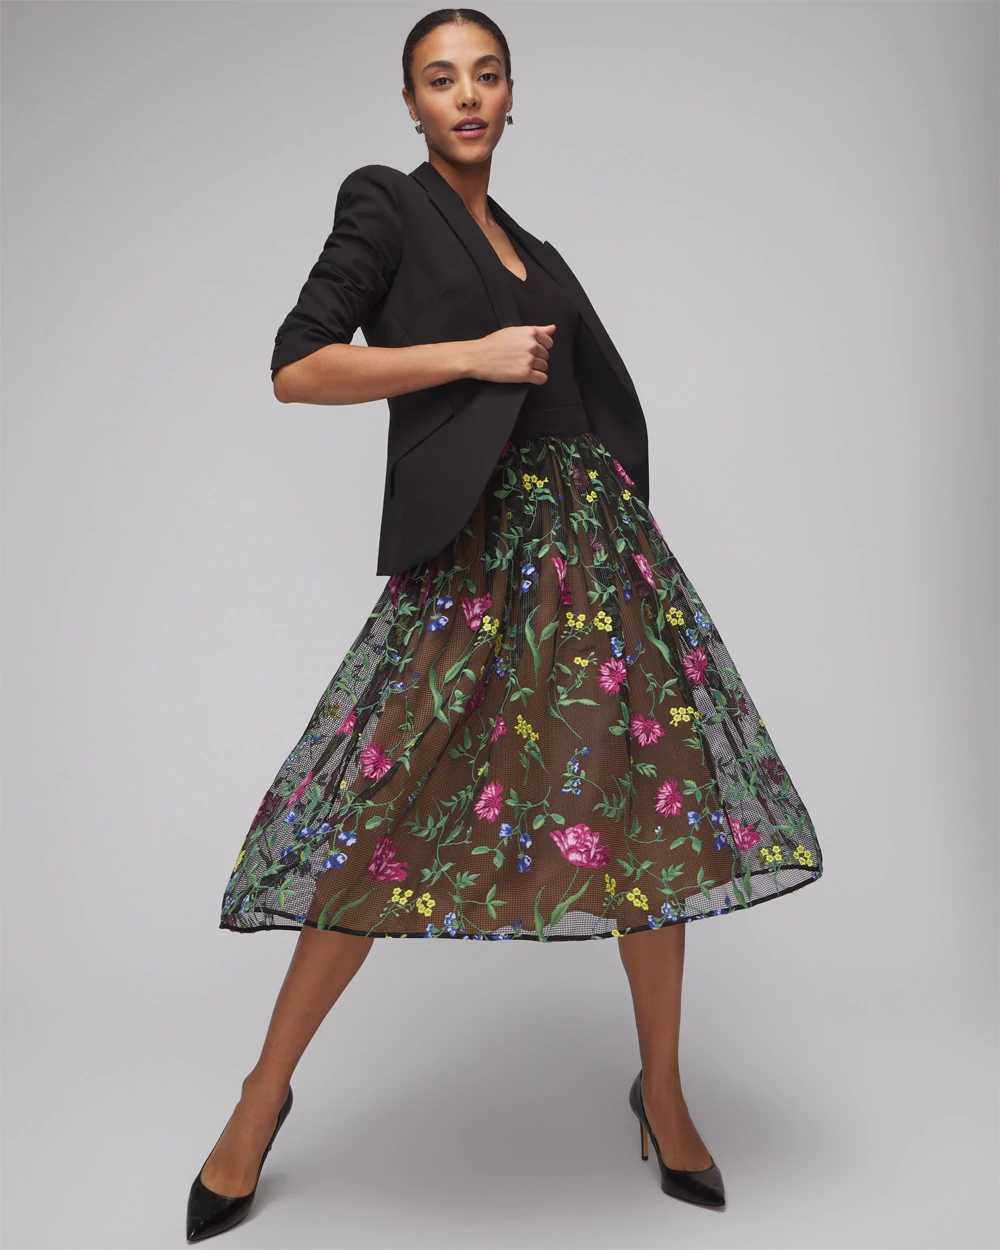 Petite Embroidered Fit & Flare Skirt click to view larger image.